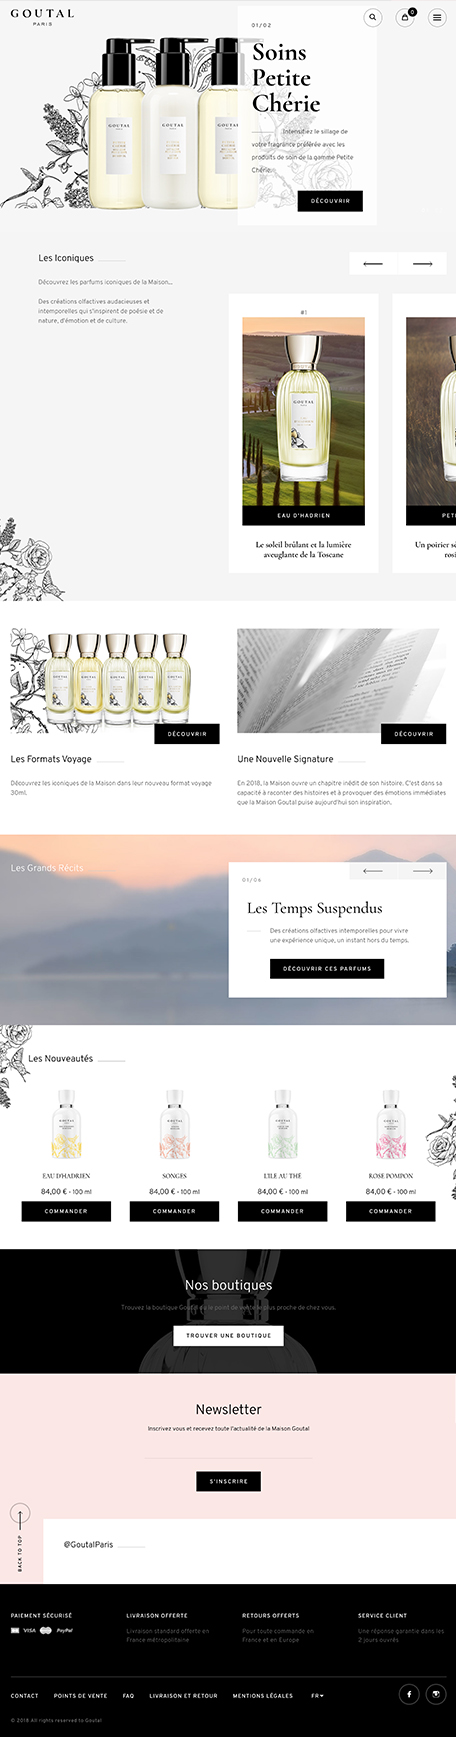 Agence-DND-Creation-Site-ECommerce-Annick-Goutal-22